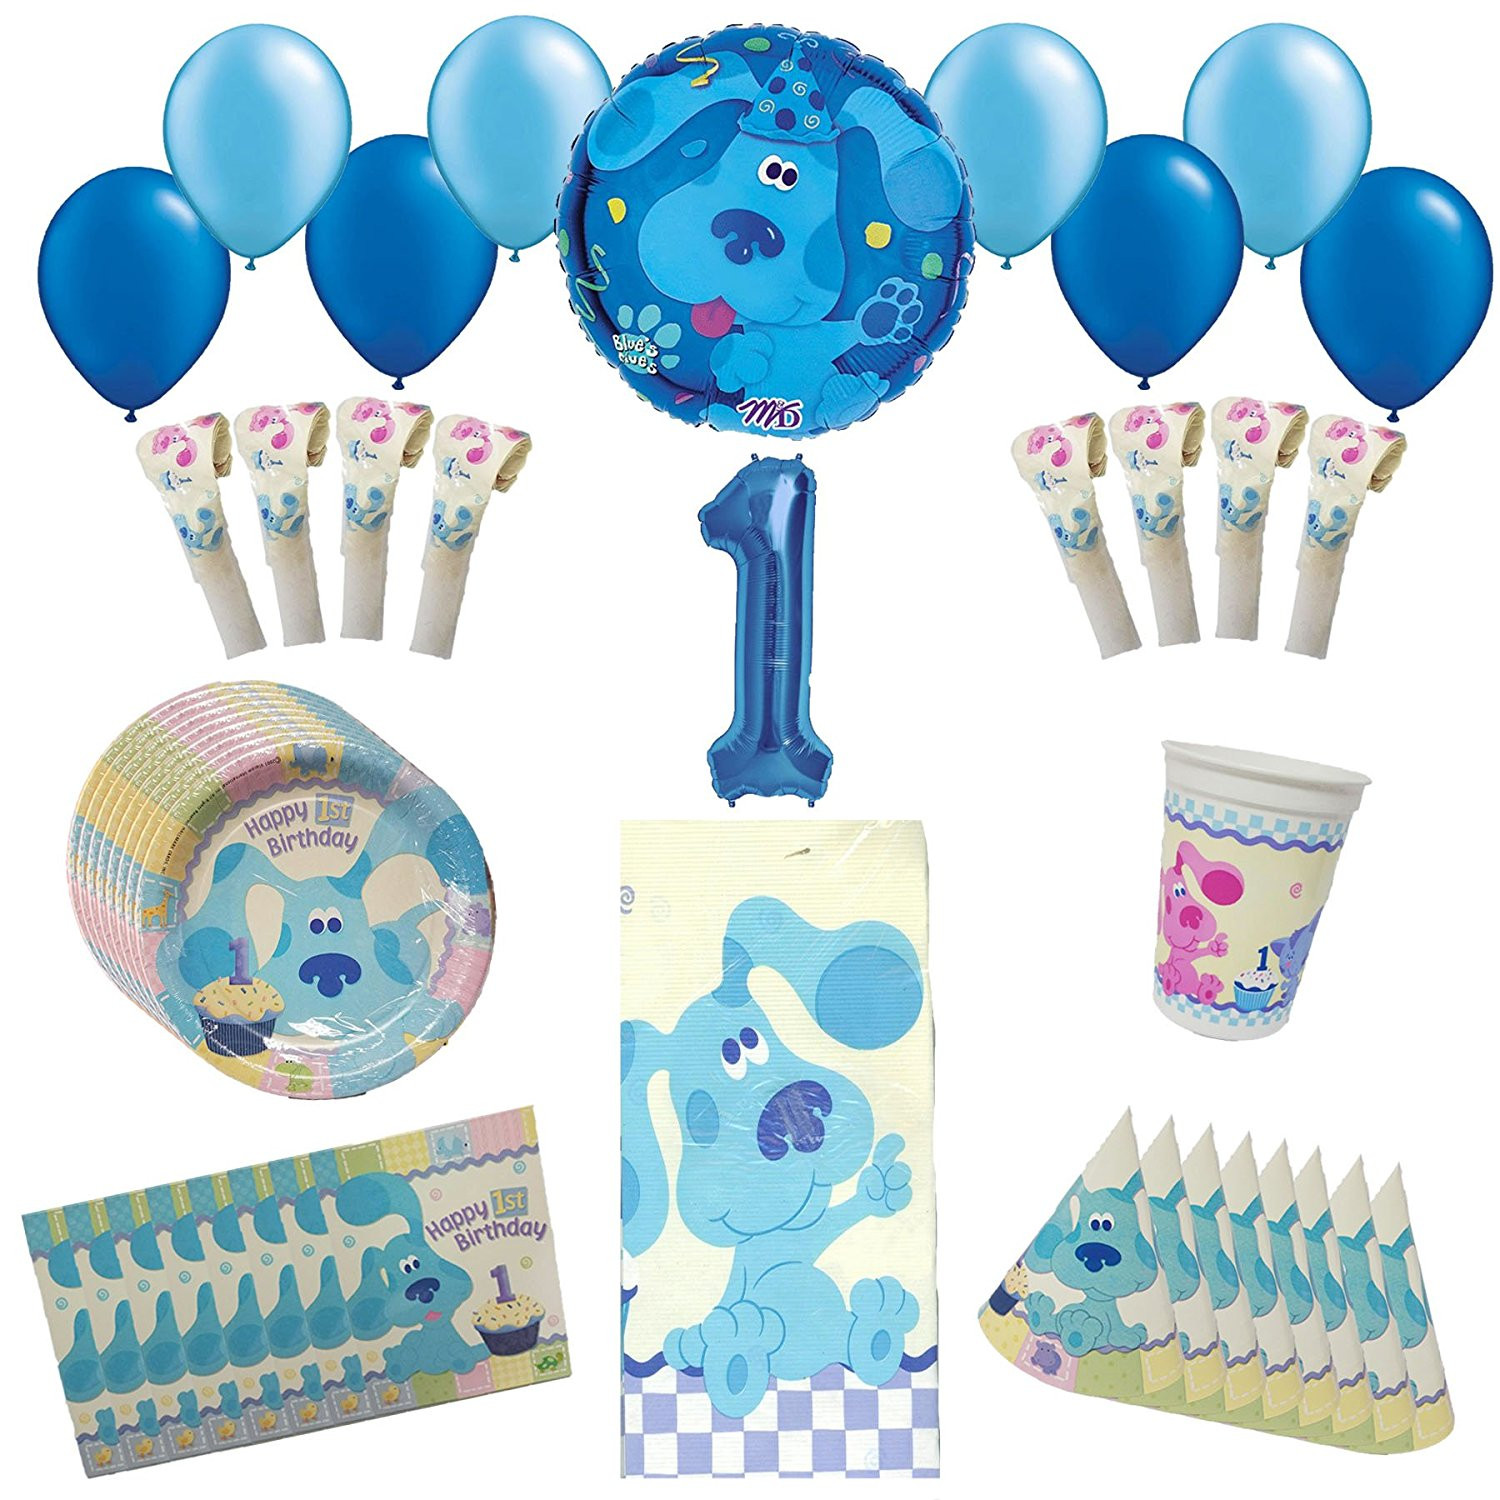 Clue Birthday Party
 Buy Blues Clues 1st Birthday Party Pack 44pc Including in